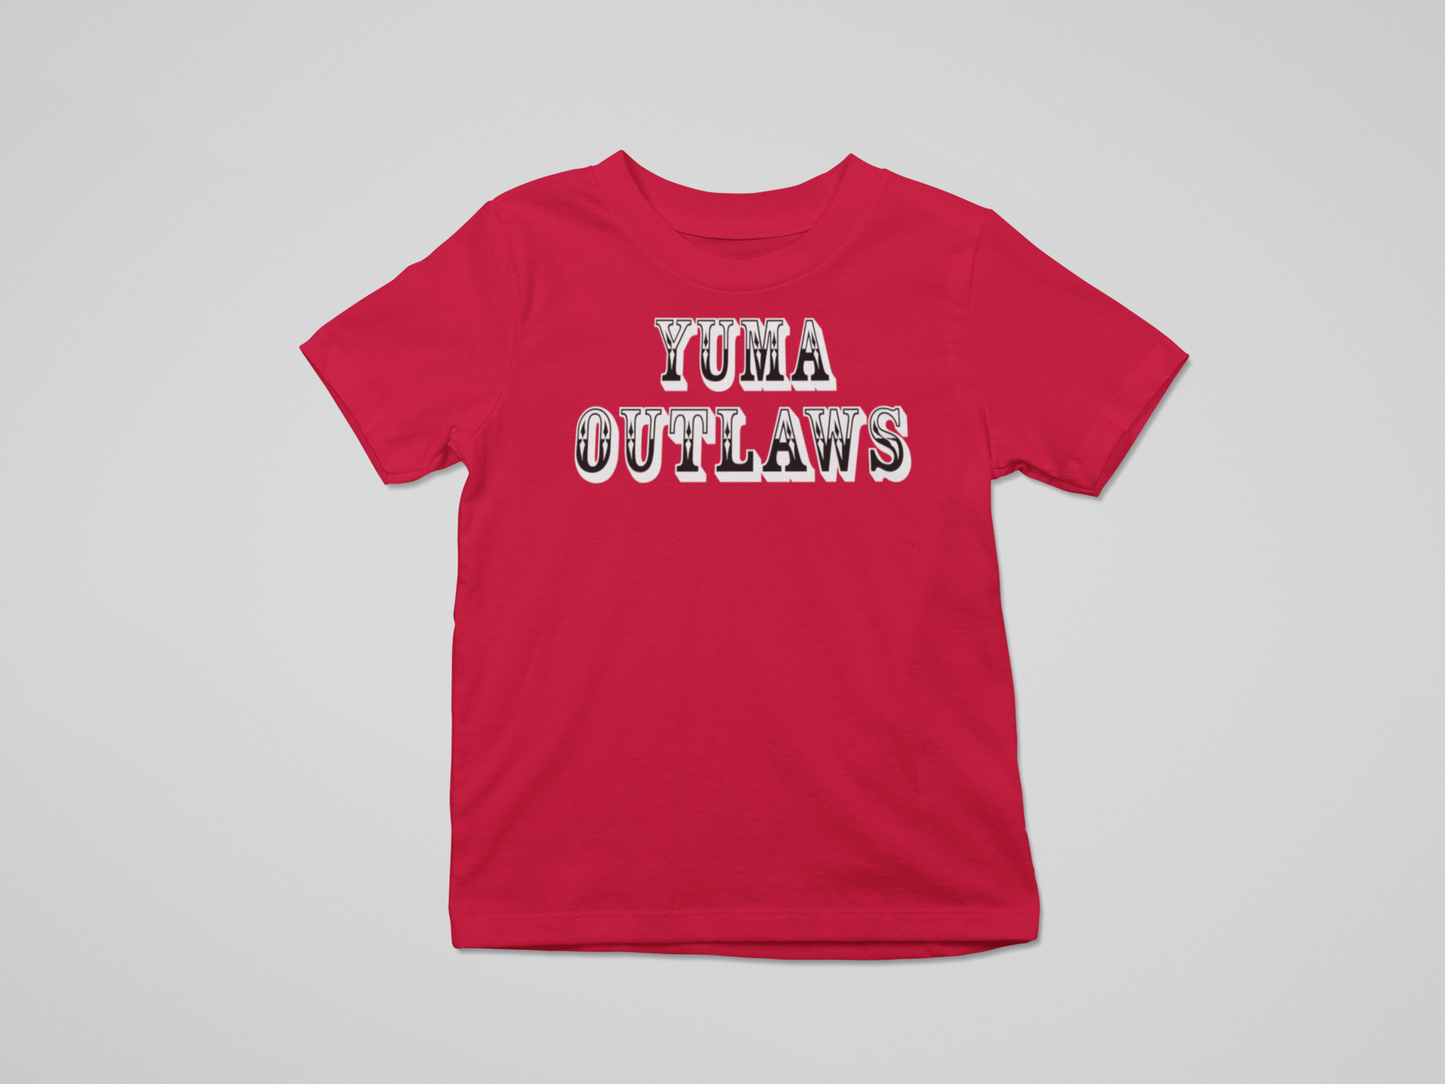 yuma outlaws toddler t-shirt: for cute lil outlaws only!